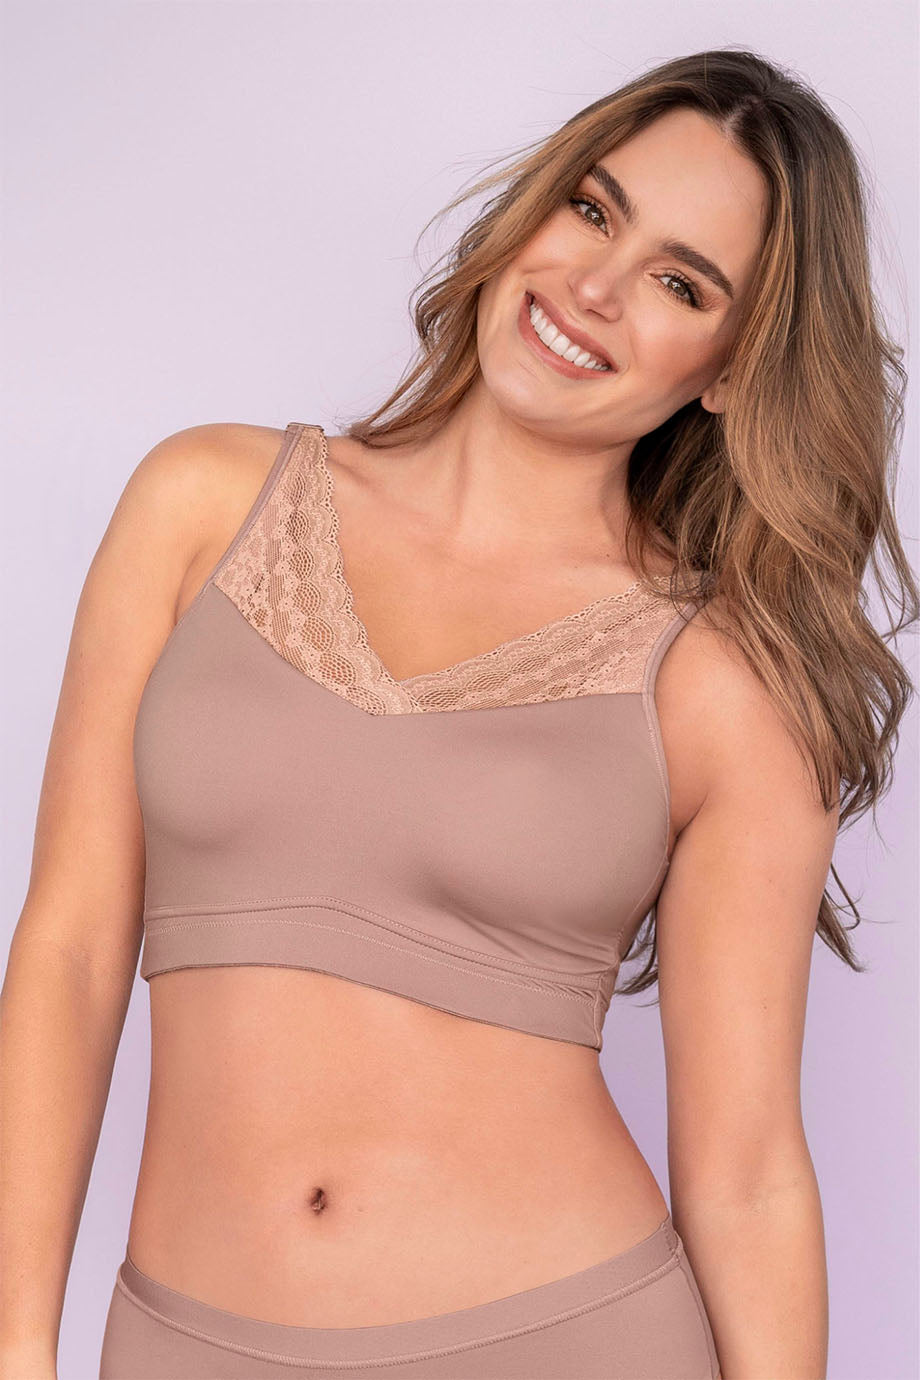 Comfy Mastectomy Bra. Enhances Your Natural Shape with a Seamless fit